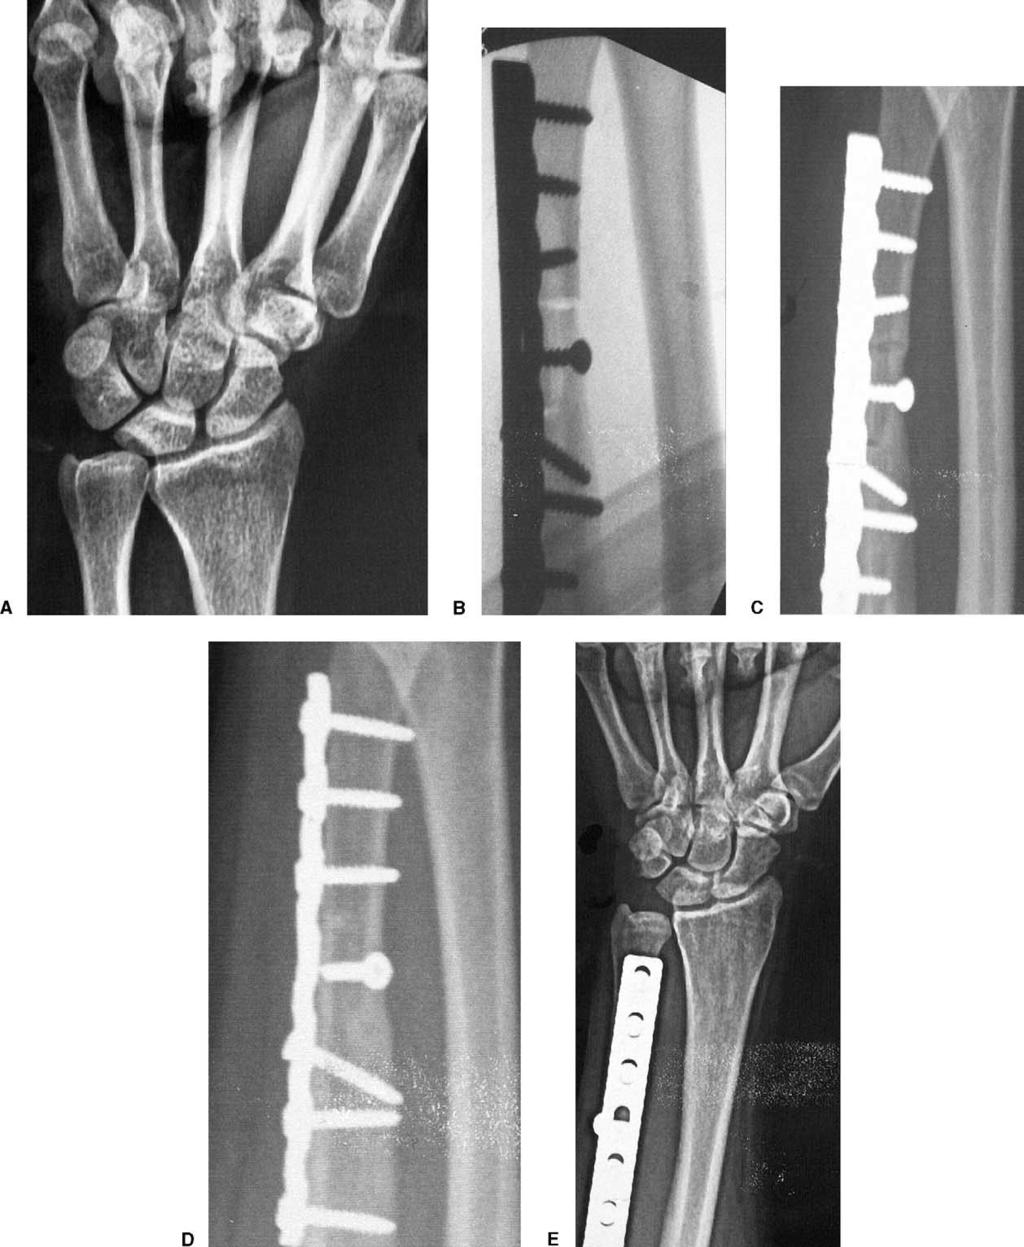 946 The Journal of Hand Surgery / Vol. 30A No. 5 September 2005 Figure 2. (A) Preoperative pronated grip view radiograph of a patient with ulnocarpal impaction.